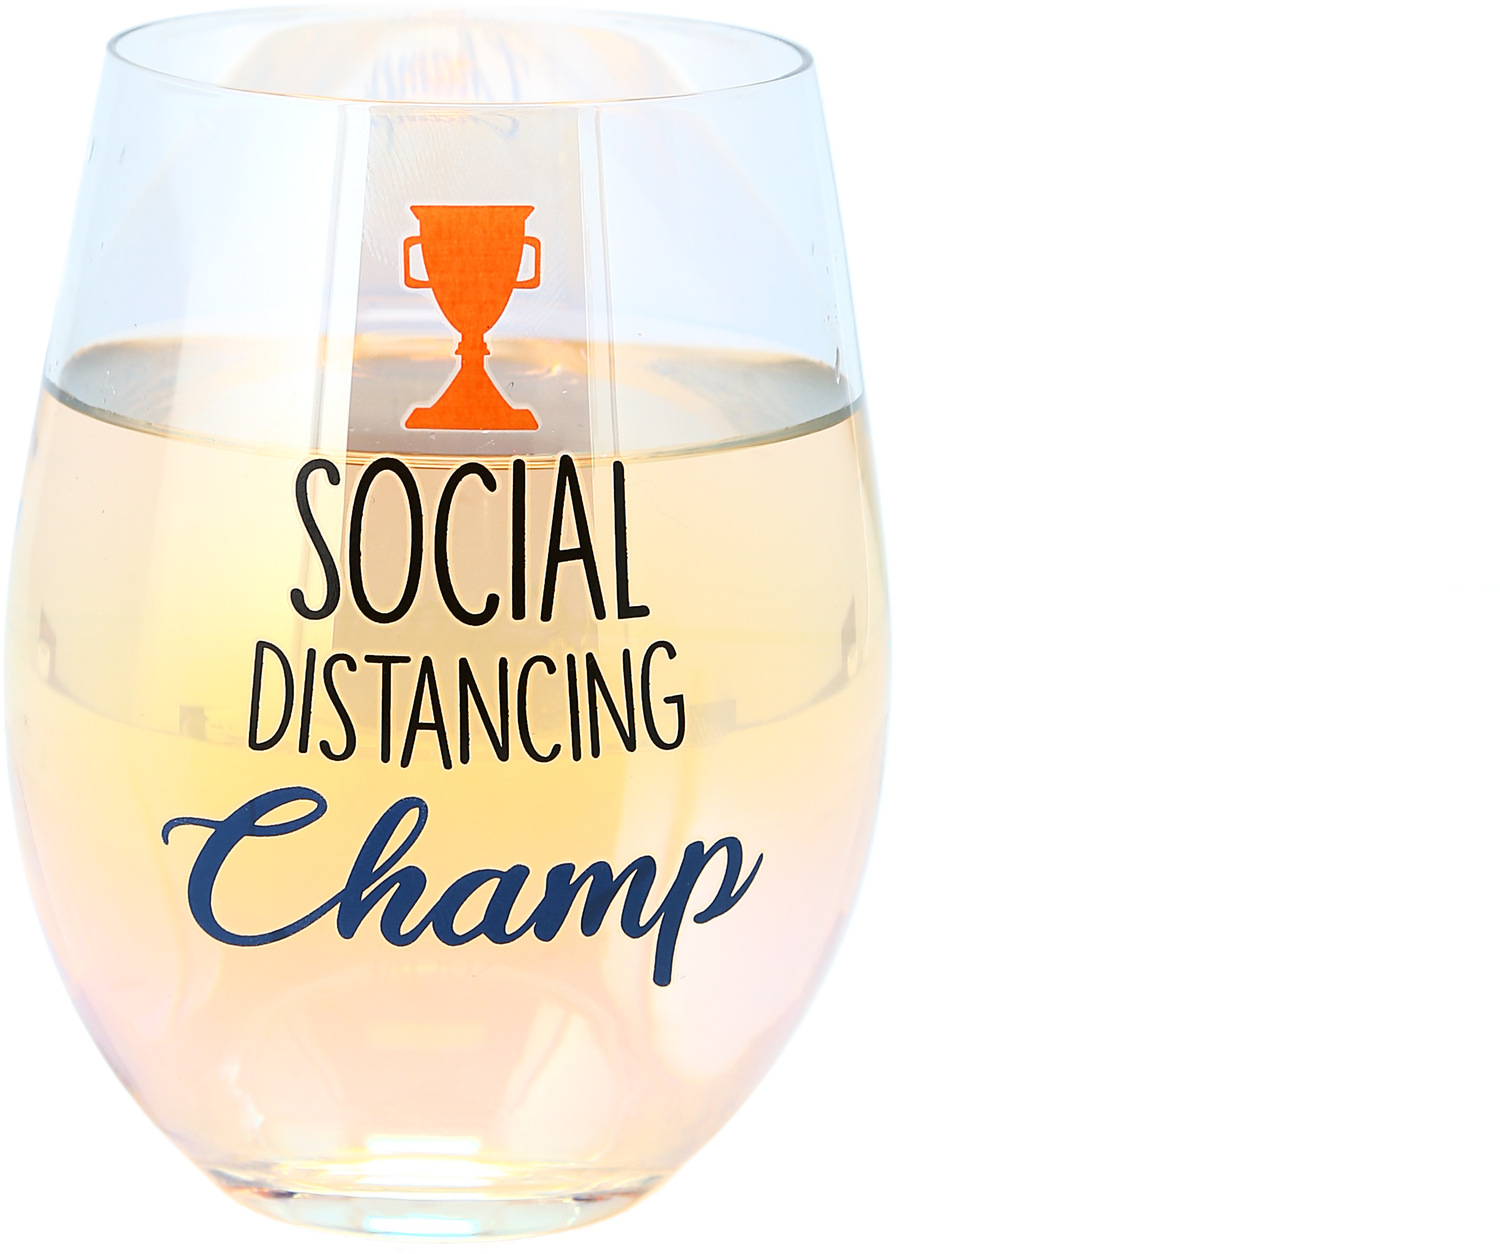 Social Distancing Champ by Essentially Yours - Social Distancing Champ - 18 oz Stemless Wine Glass